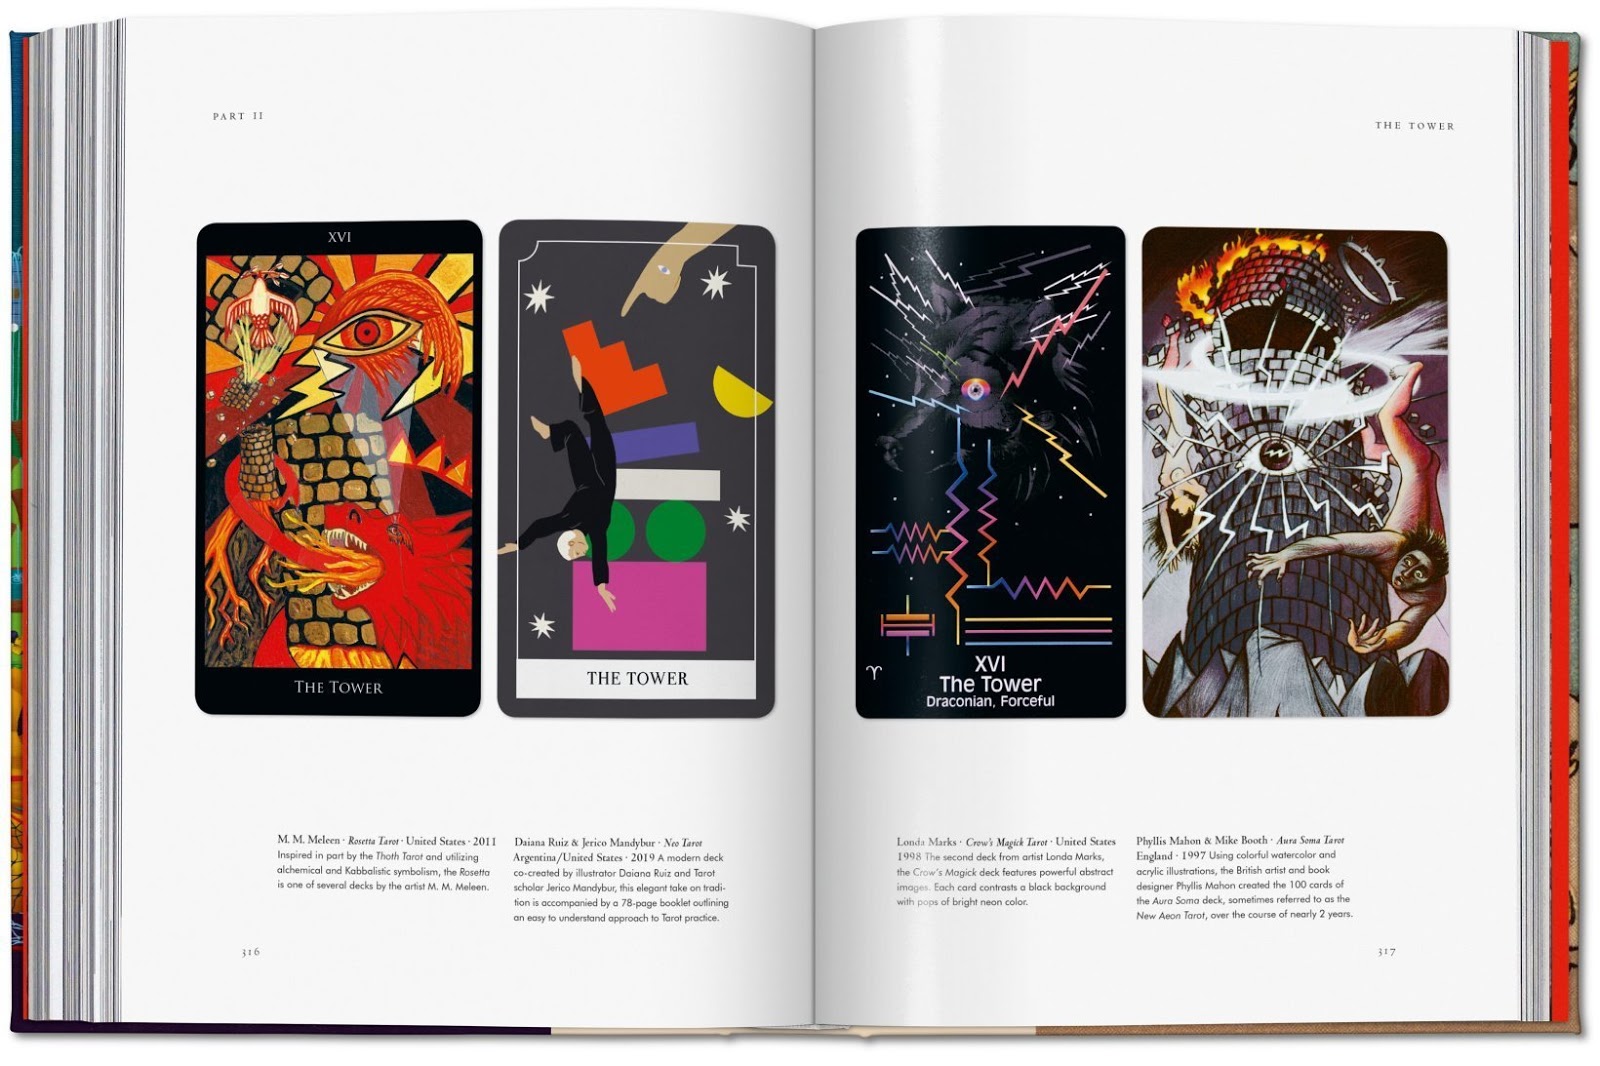 The Magpie Mason Taschen Launches Library Of Esoterica With Tarot Book